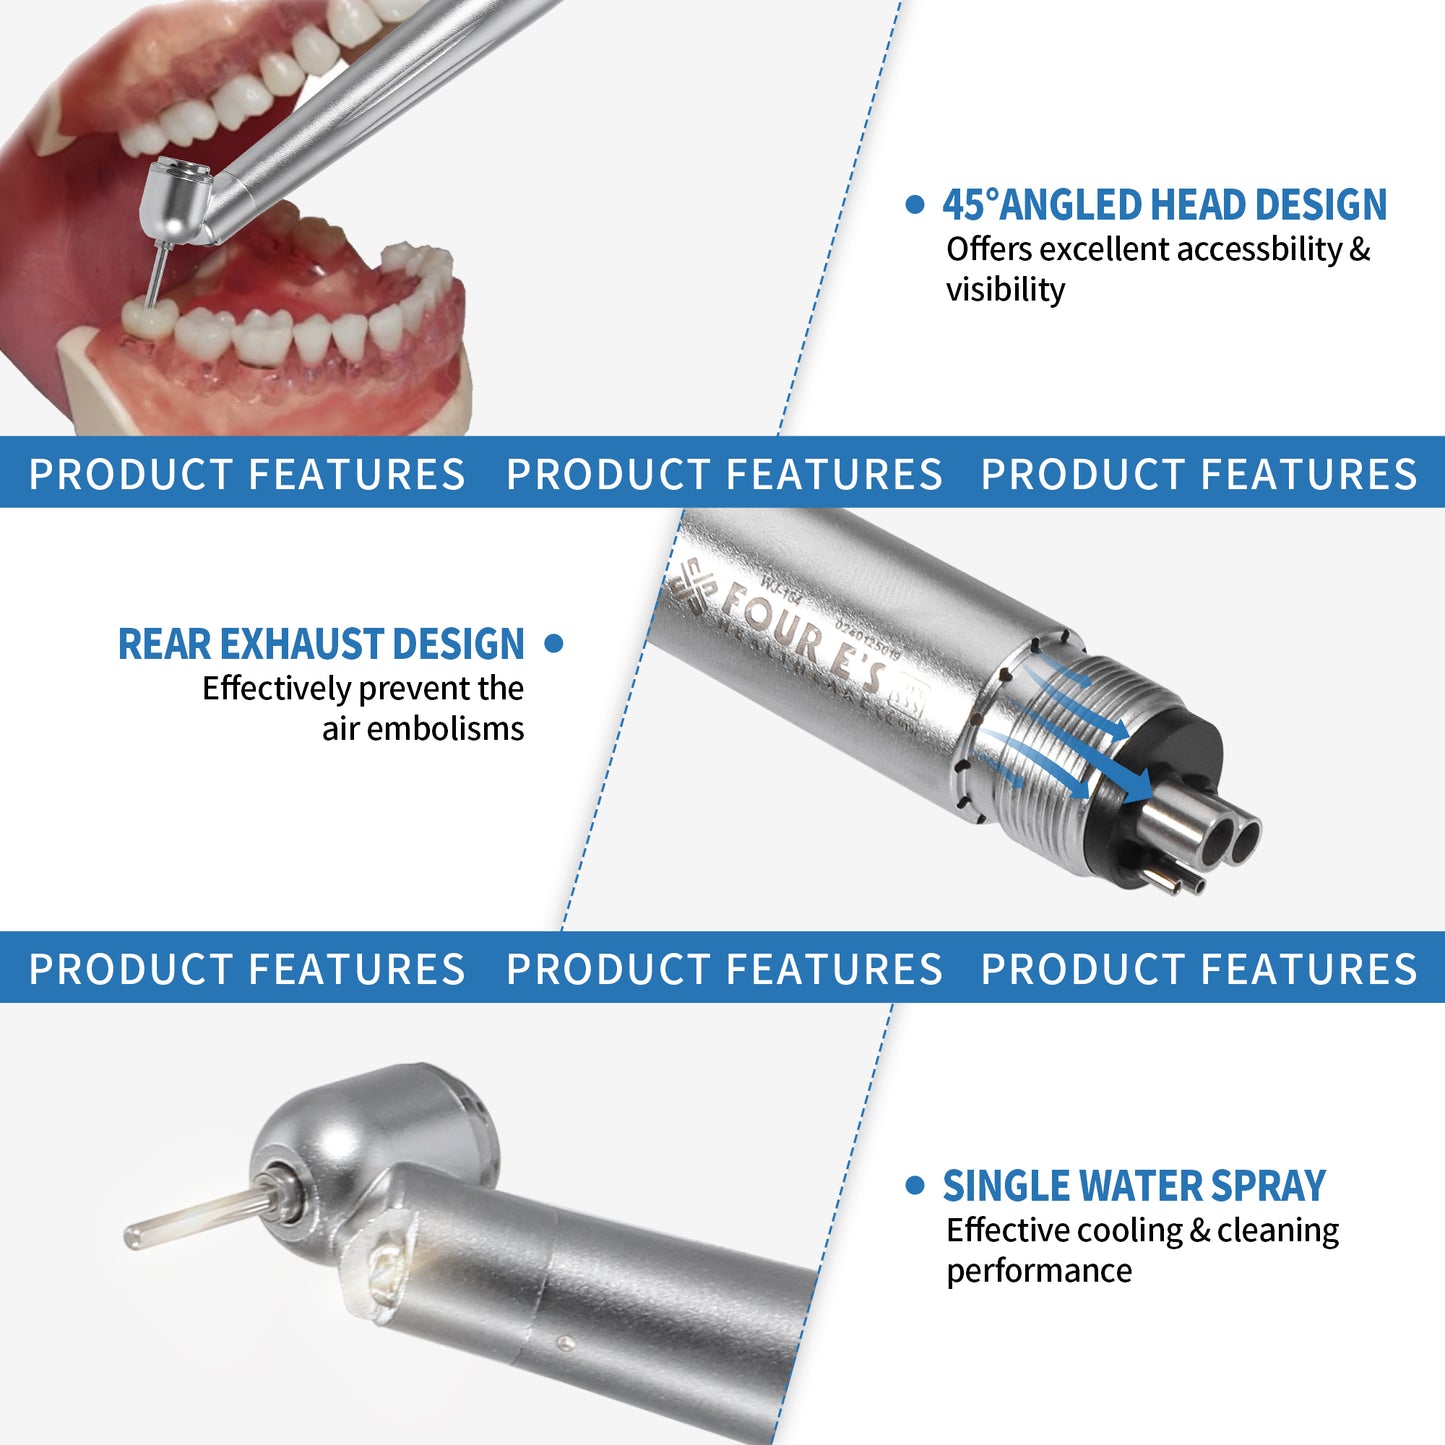 4E's USA Dental 45-Degree Surgical Handpiece 510(K) Approved: Highspeed Surgical Handpiece with LED Generator, Push Button & 4-Hole Coupling, Fully Autoclavable